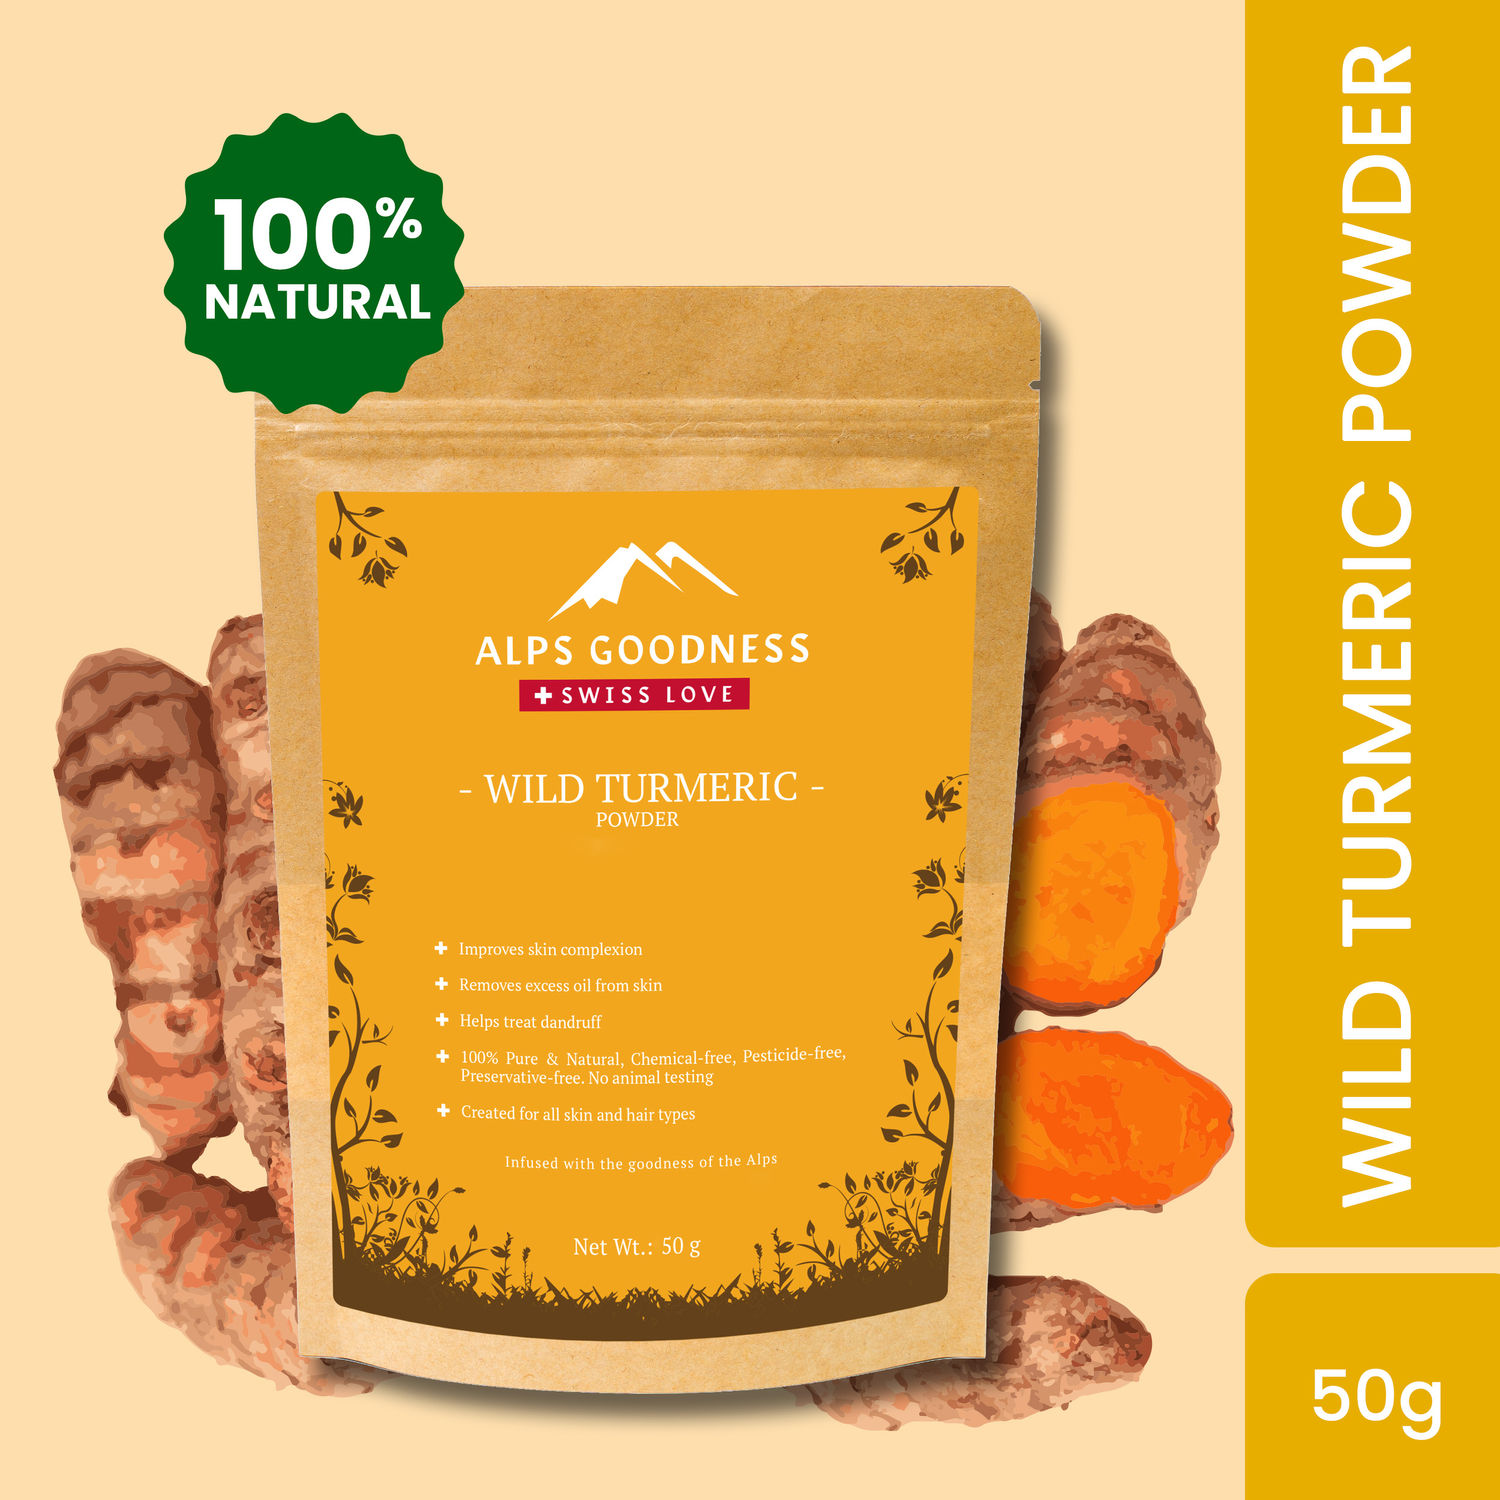 Alps Goodness Powder - Wild Turmeric (50 gm)| Kasturi Haldi Powder| Wild Turmeric powder| 100% Natural Powder | No Chemicals, No Preservatives, No Pesticides | Face Mask for Even Toned Skin | Face Mask for Glow